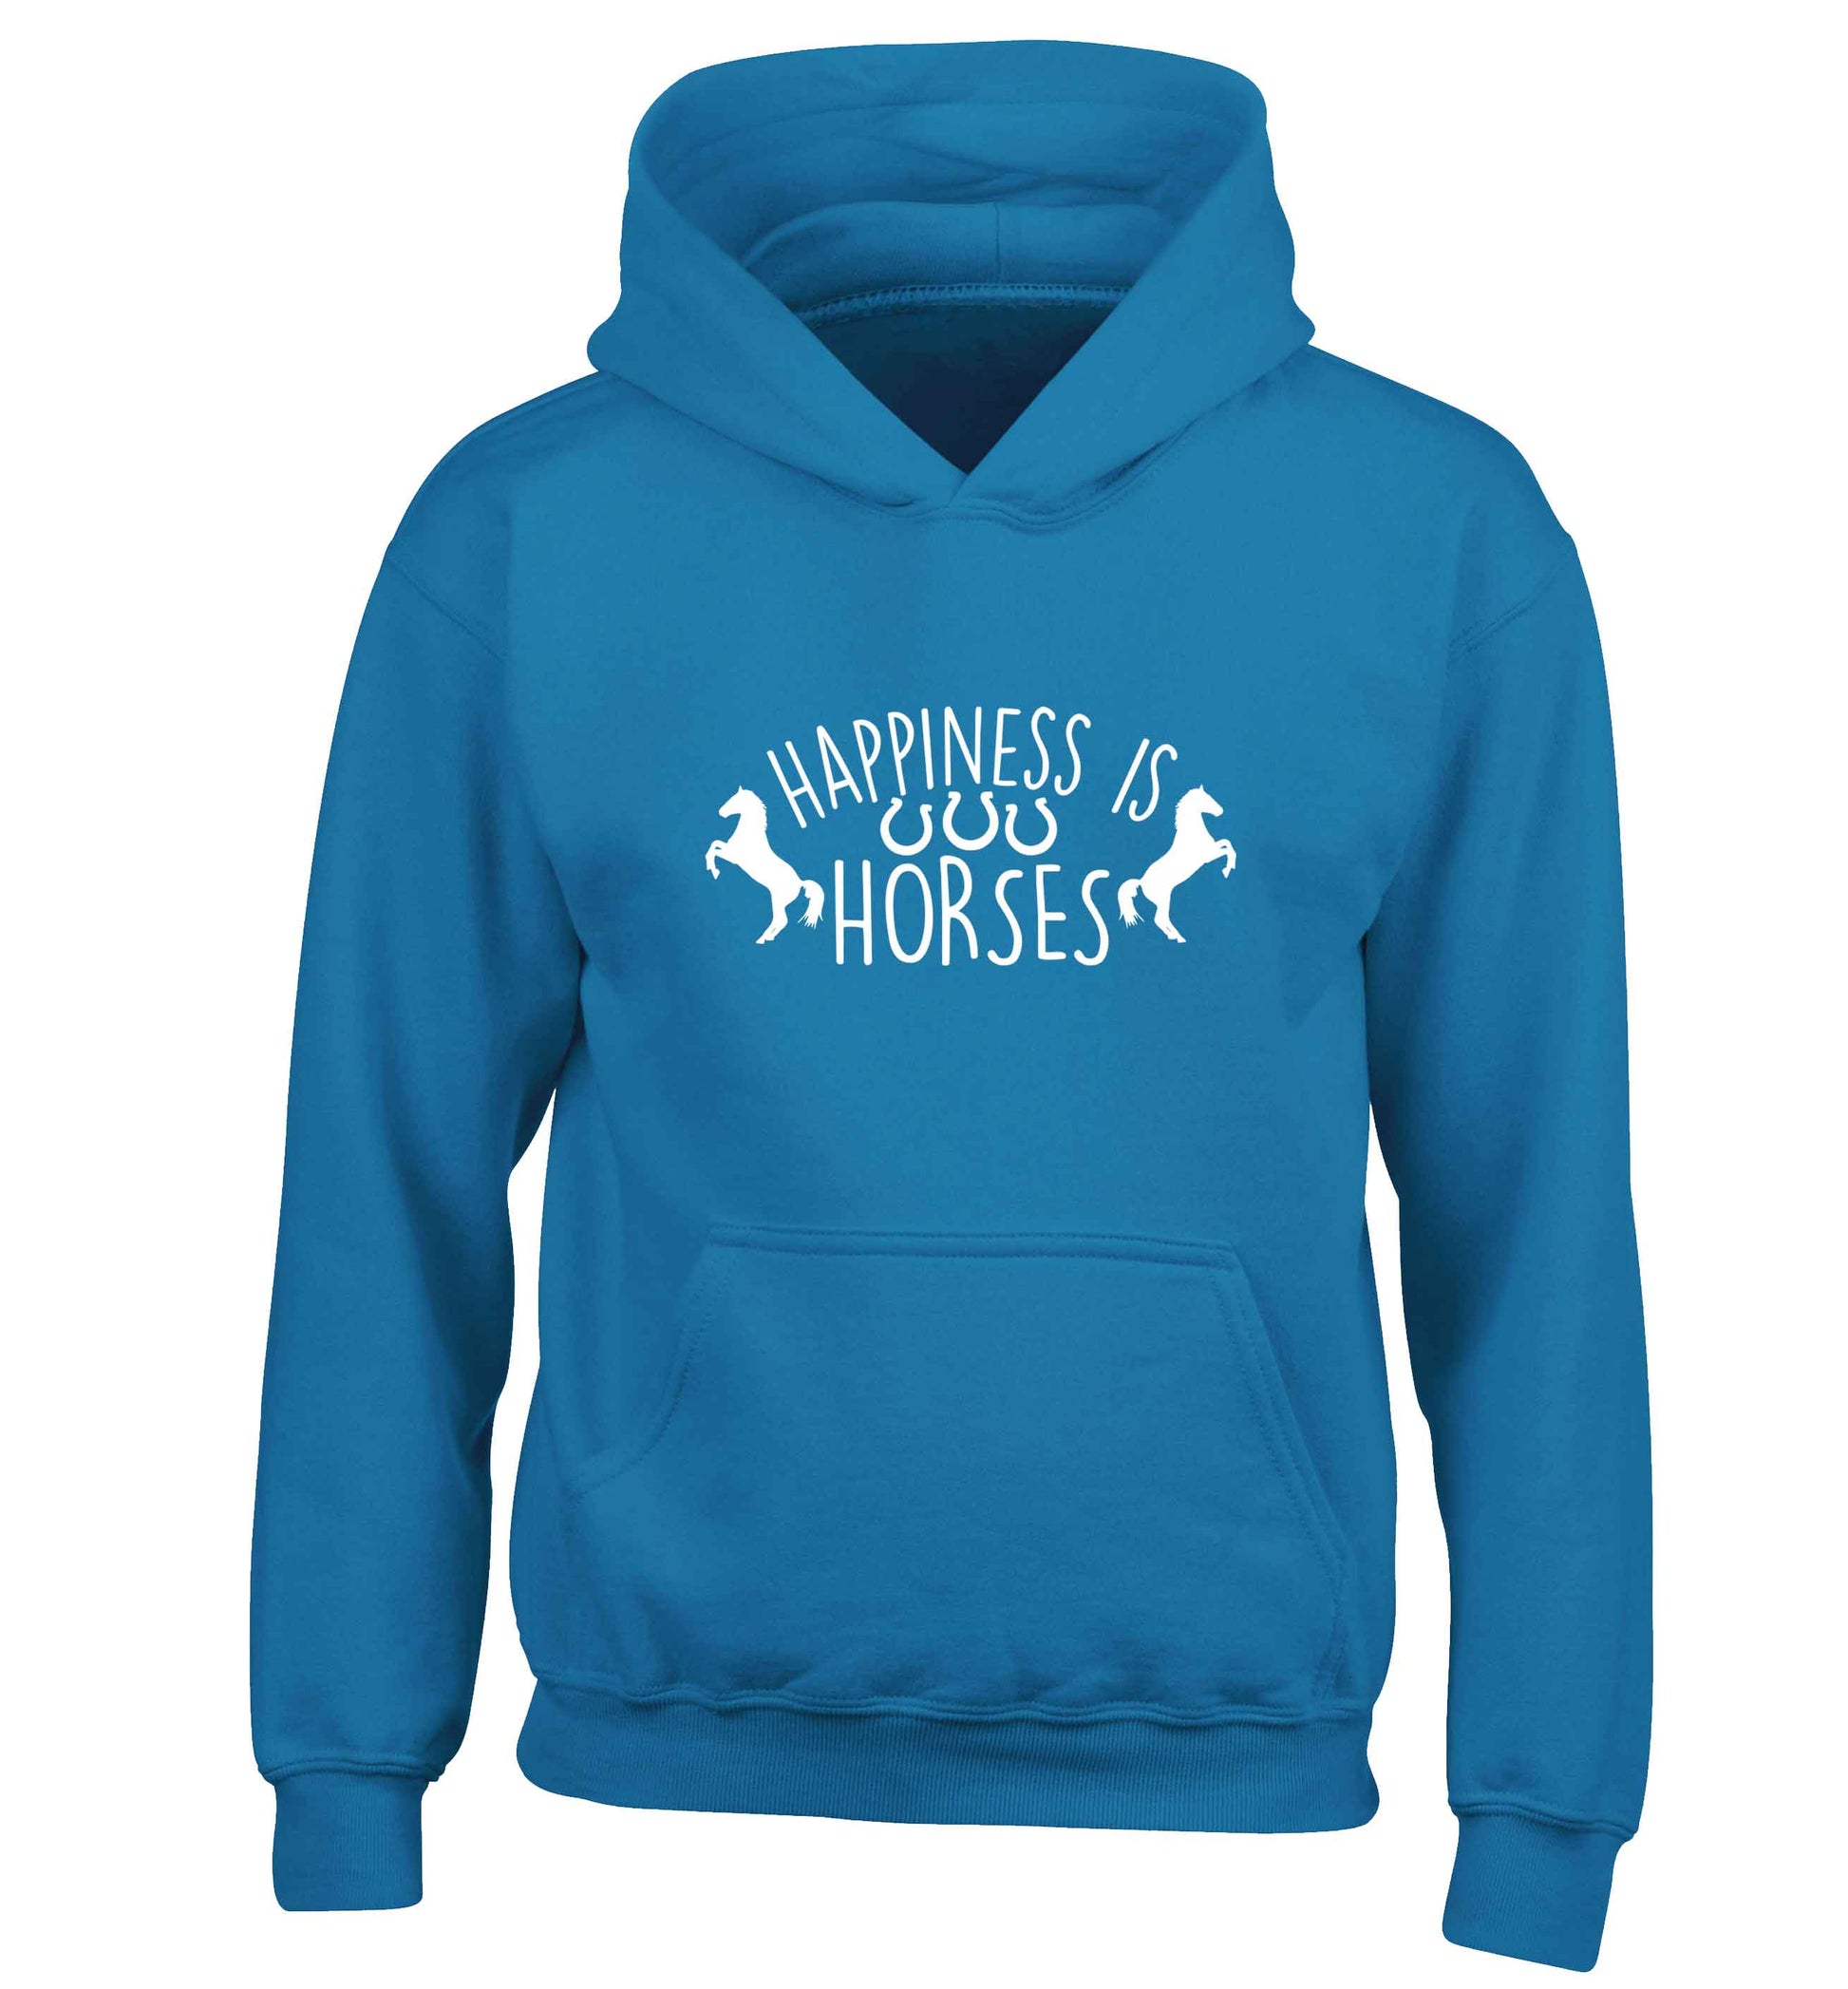 Happiness is horses children's blue hoodie 12-13 Years